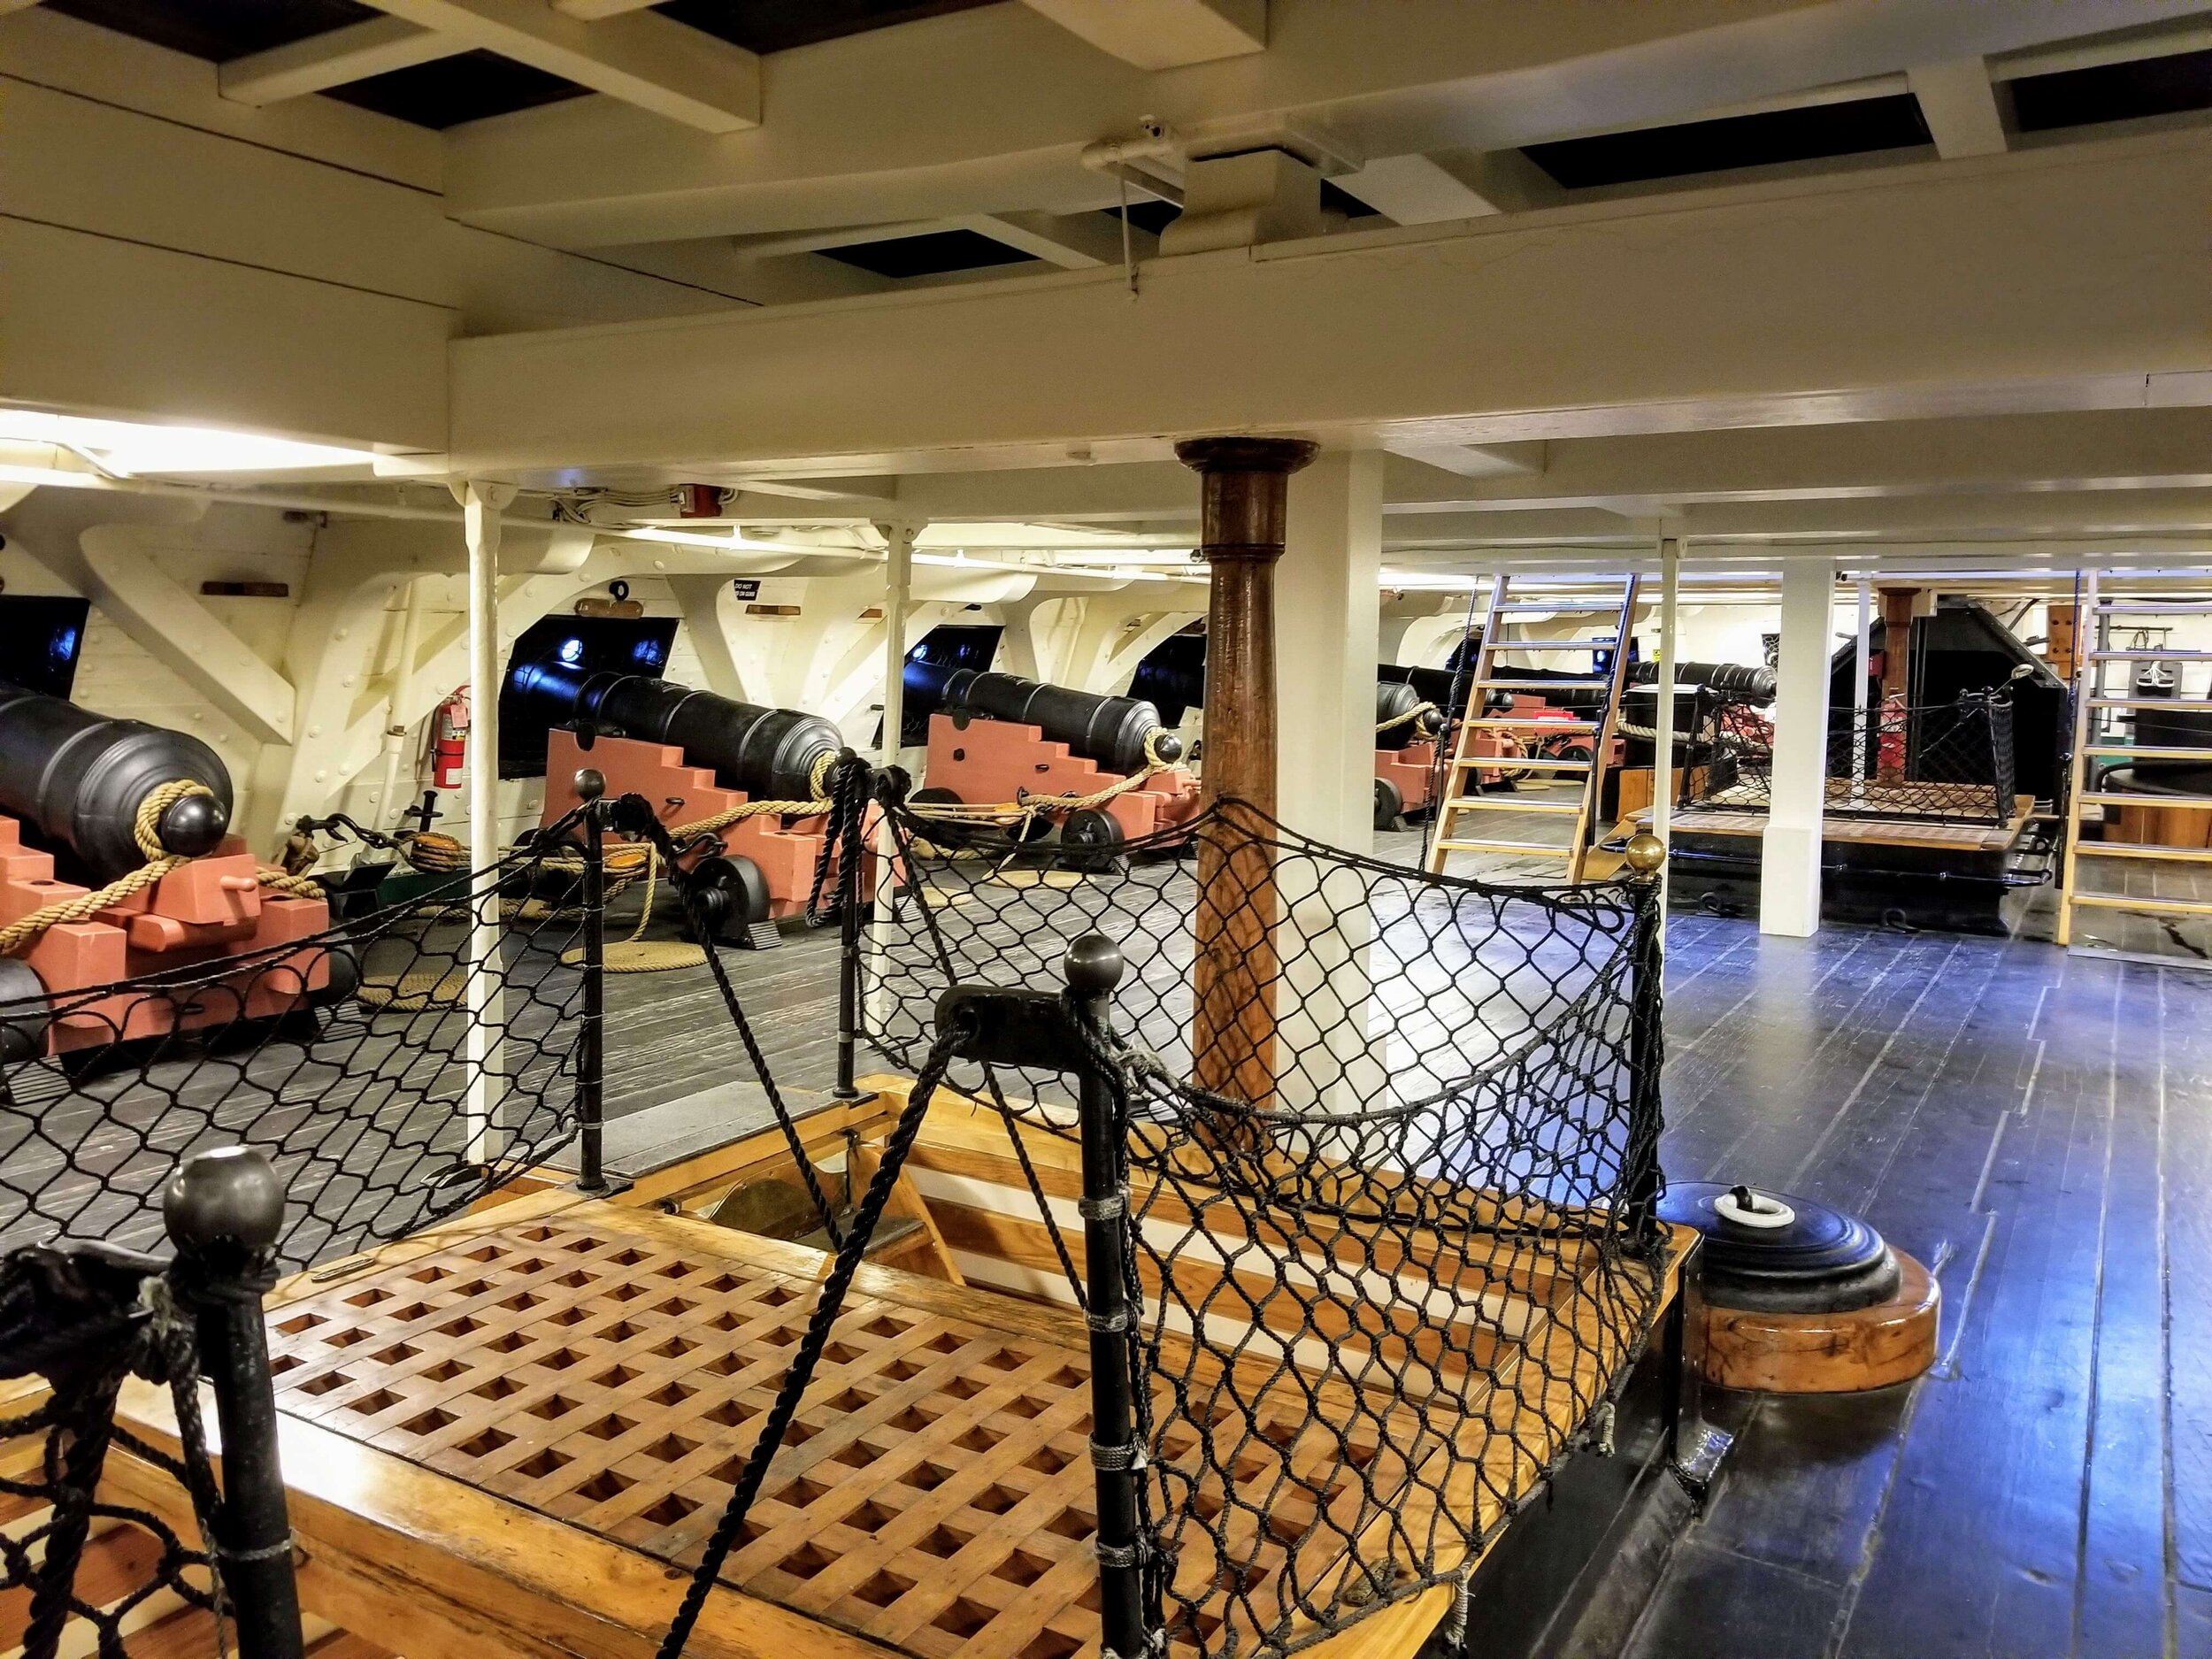  The gun deck of the USS Constitution, she is undefeated in battle, capturing several British ships during the War of 1812 